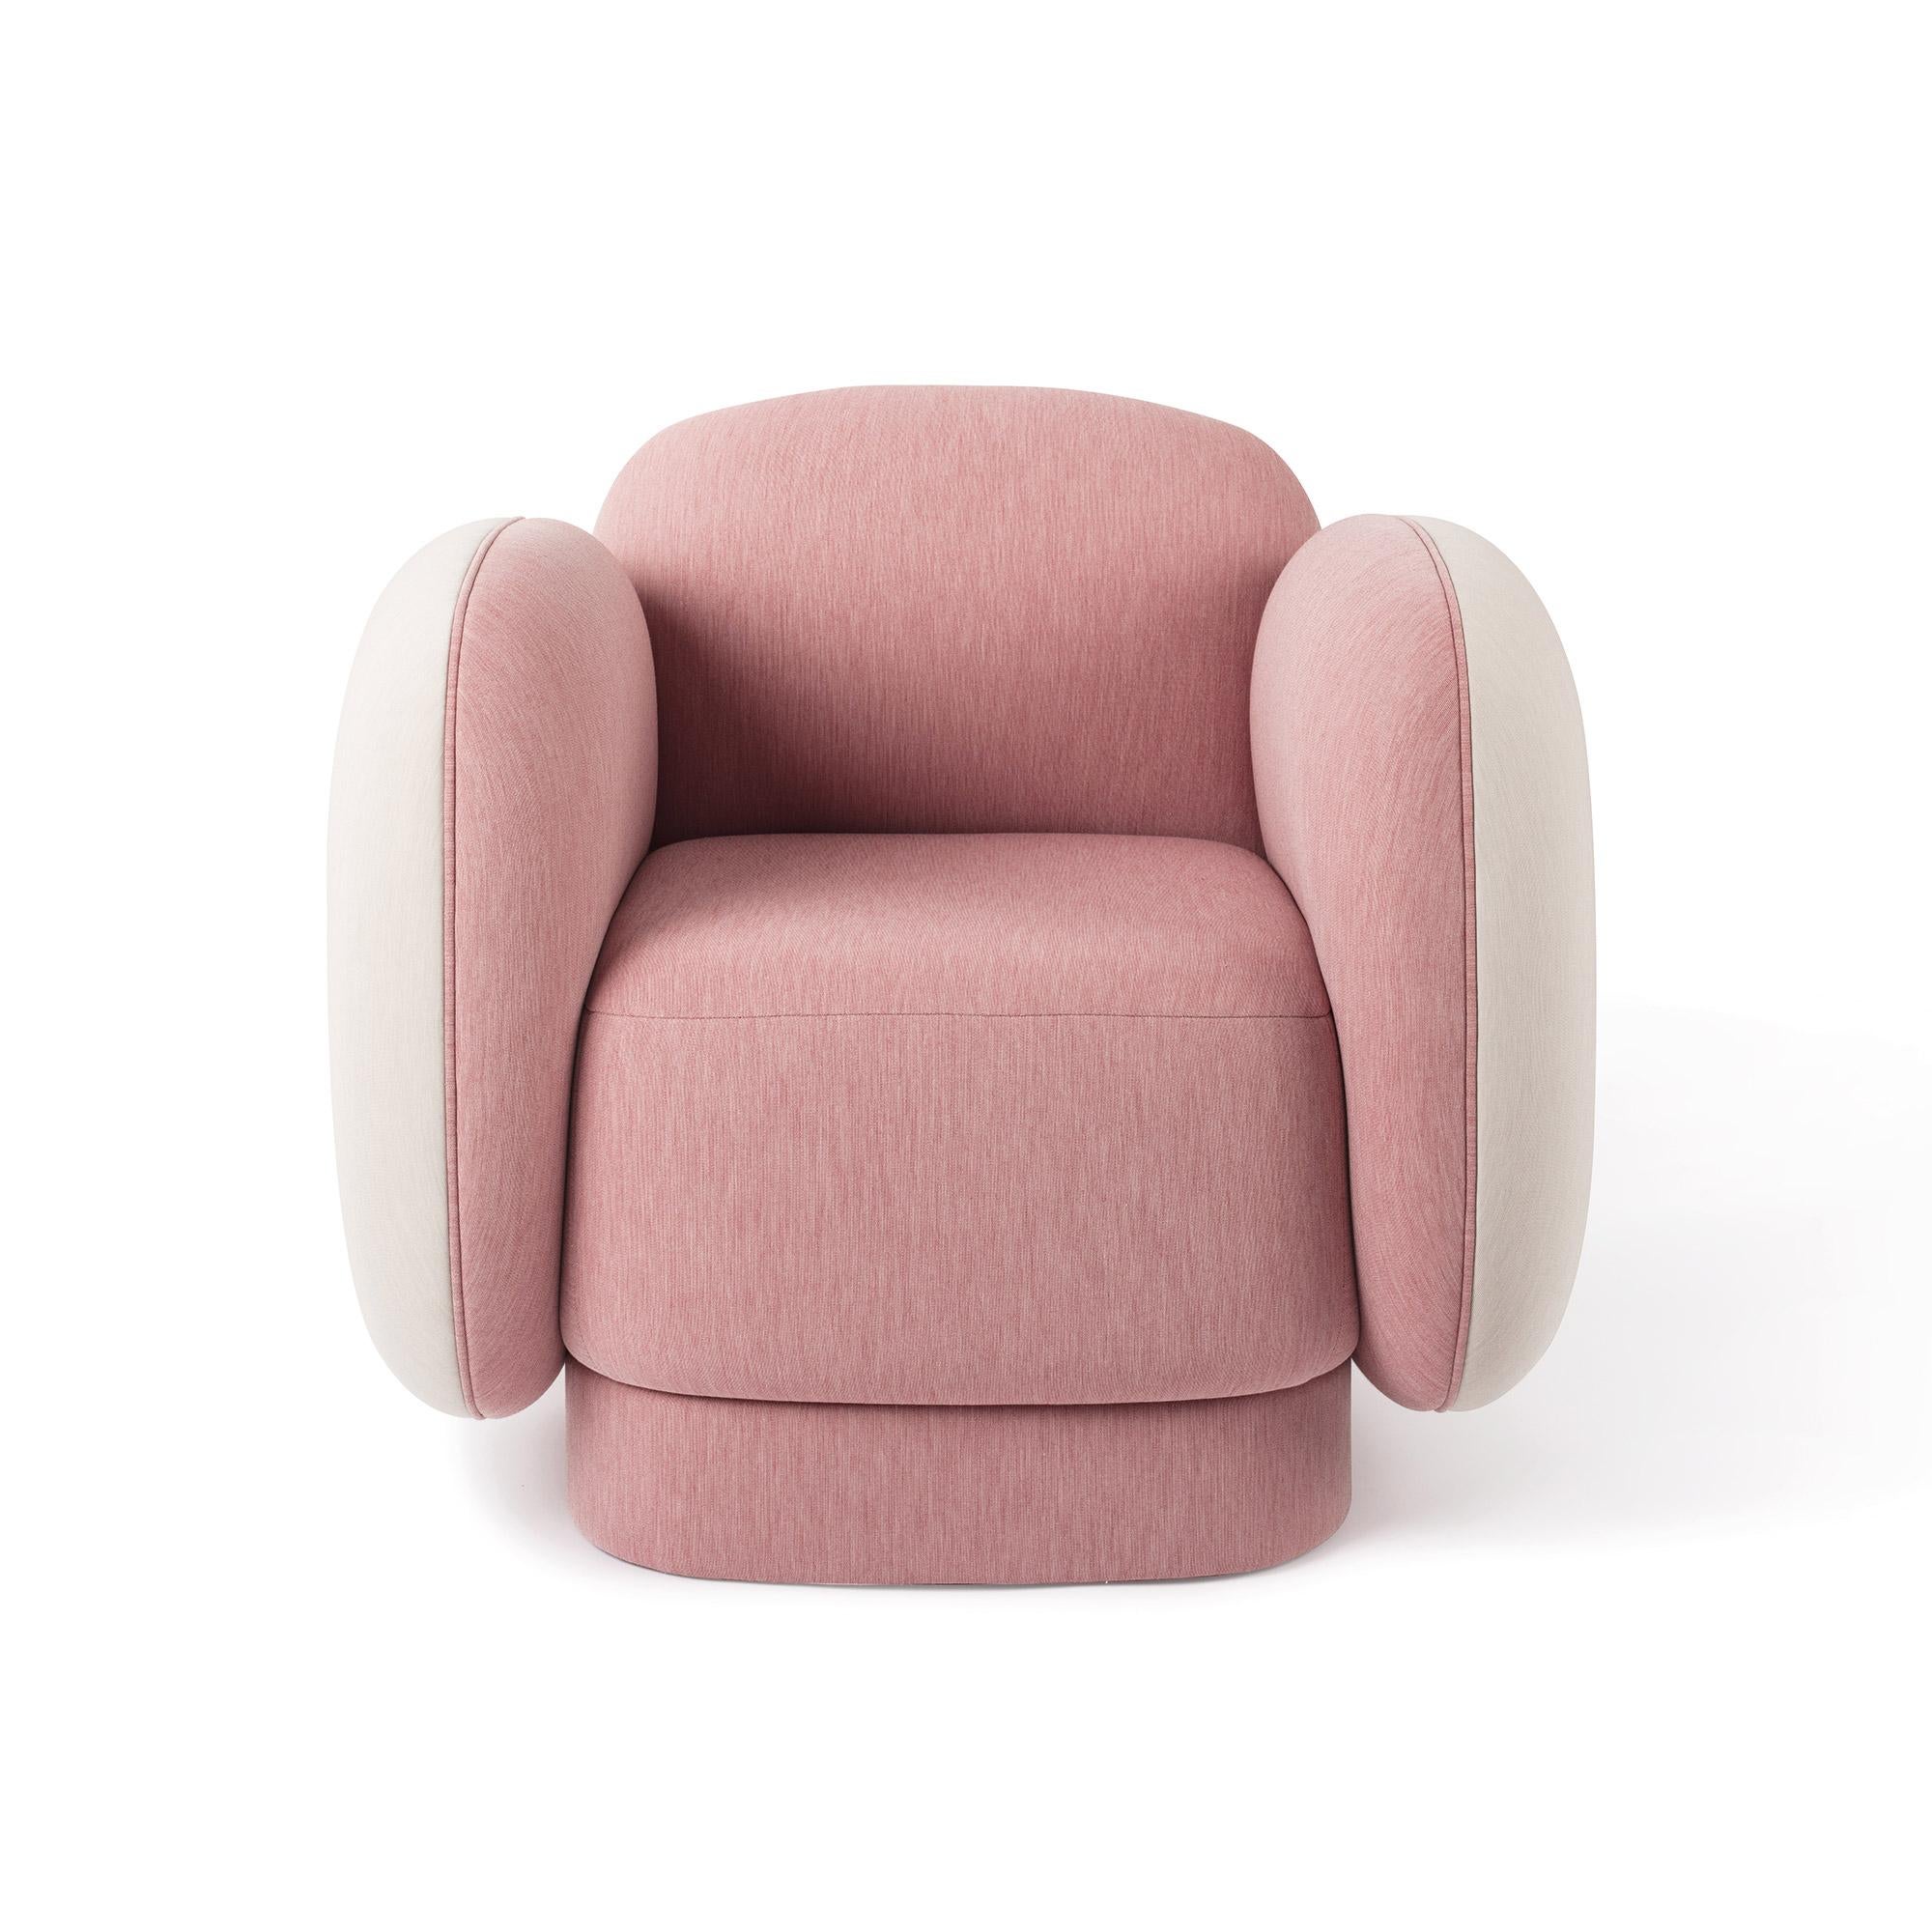 Major Tom armchair designed by Thomas Dariel
Dimensions: D 90 x W 101 x H 89 cm
Materials: Structure in solid timber and plywood. Memory foam Base and seating fully upholstered in fabric.
Available in Finishes: Kvadrat Premium Collection, Melange